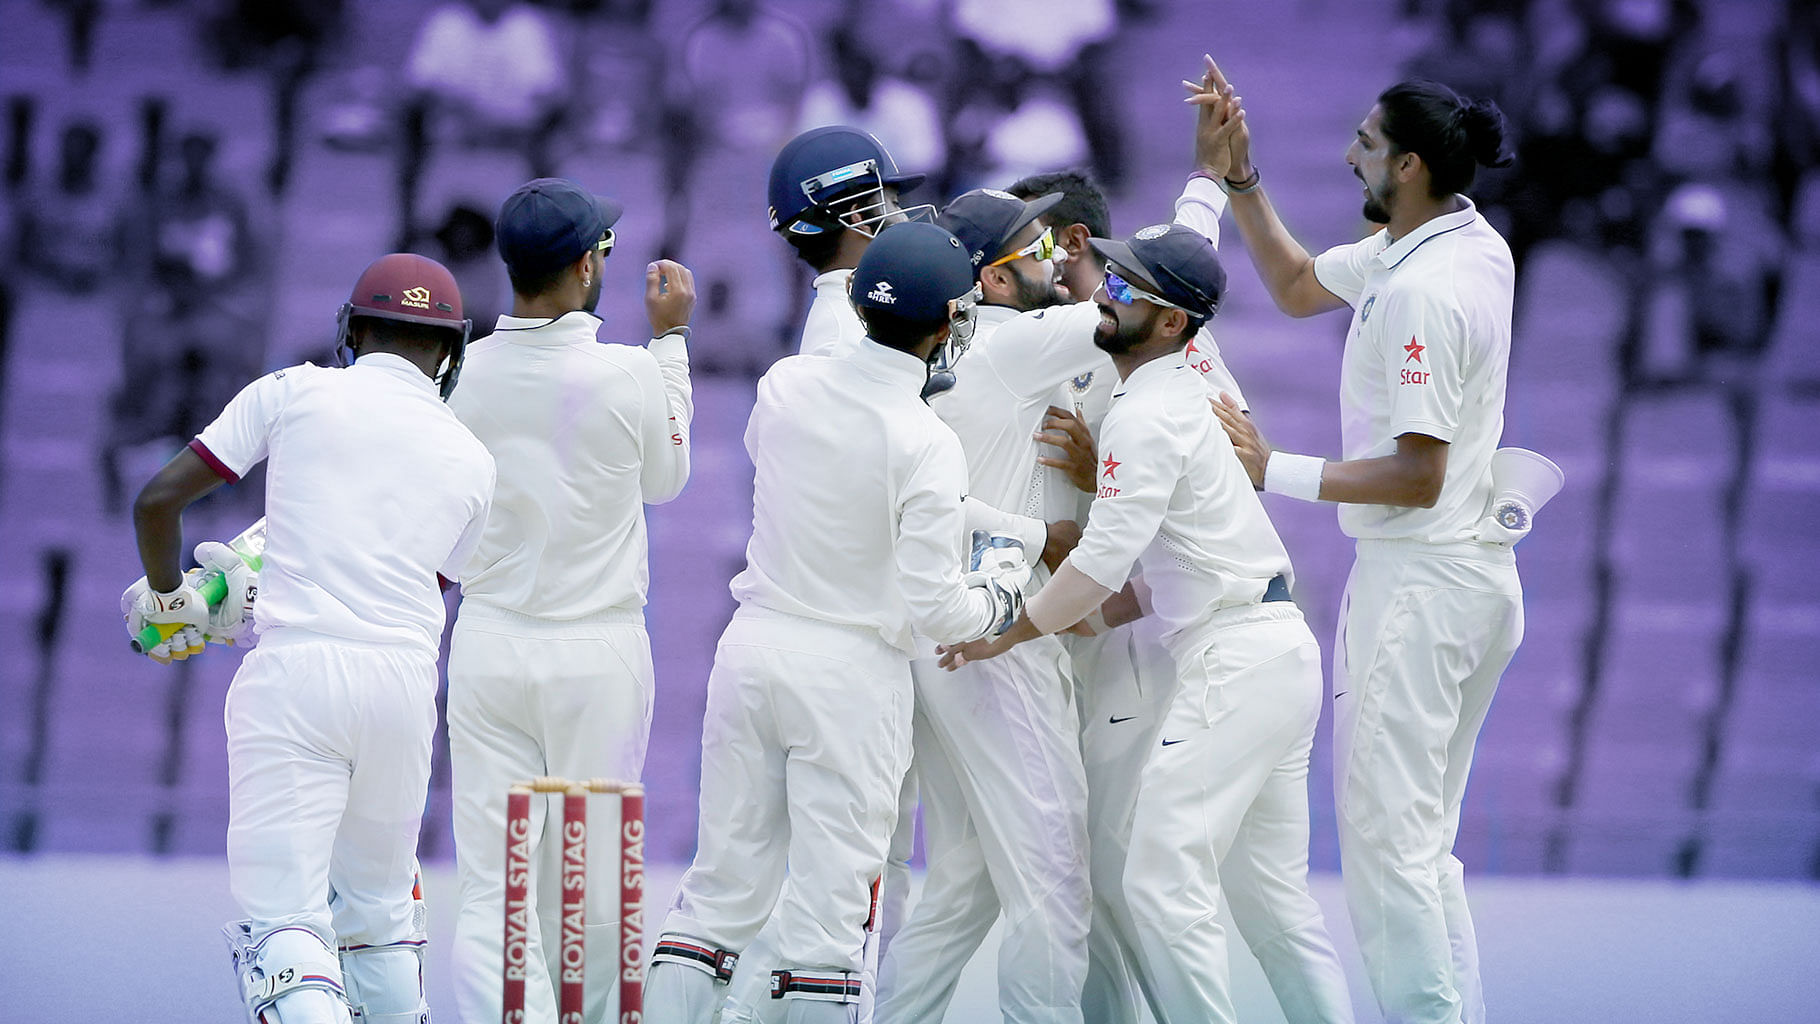 India easily defeated West Indies in their first outing at Antigua. (Photo: AP)